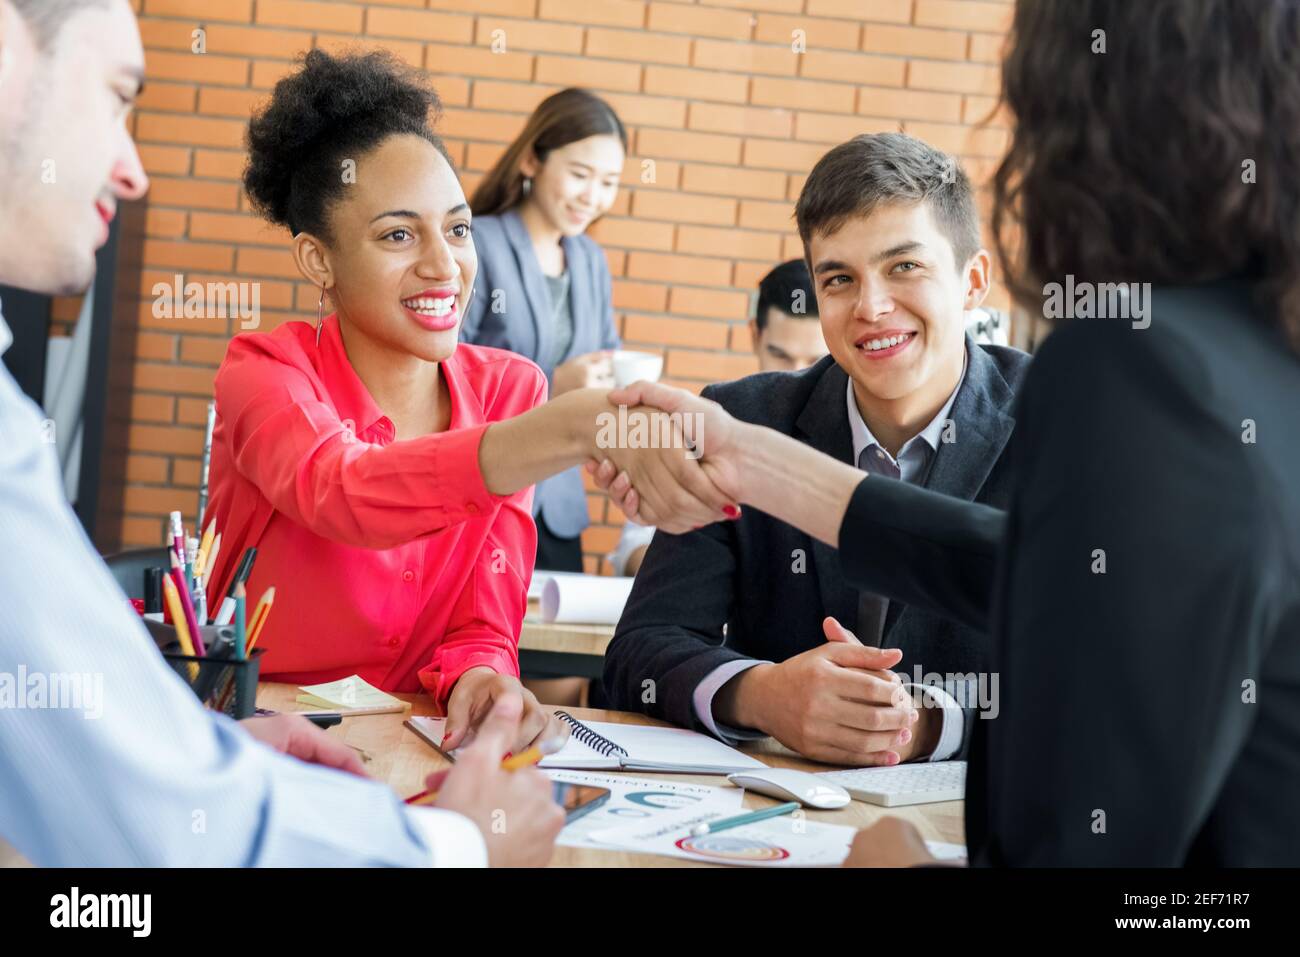 Caribbean businesswoman making handshake with her colleague in the meeting Stock Photo